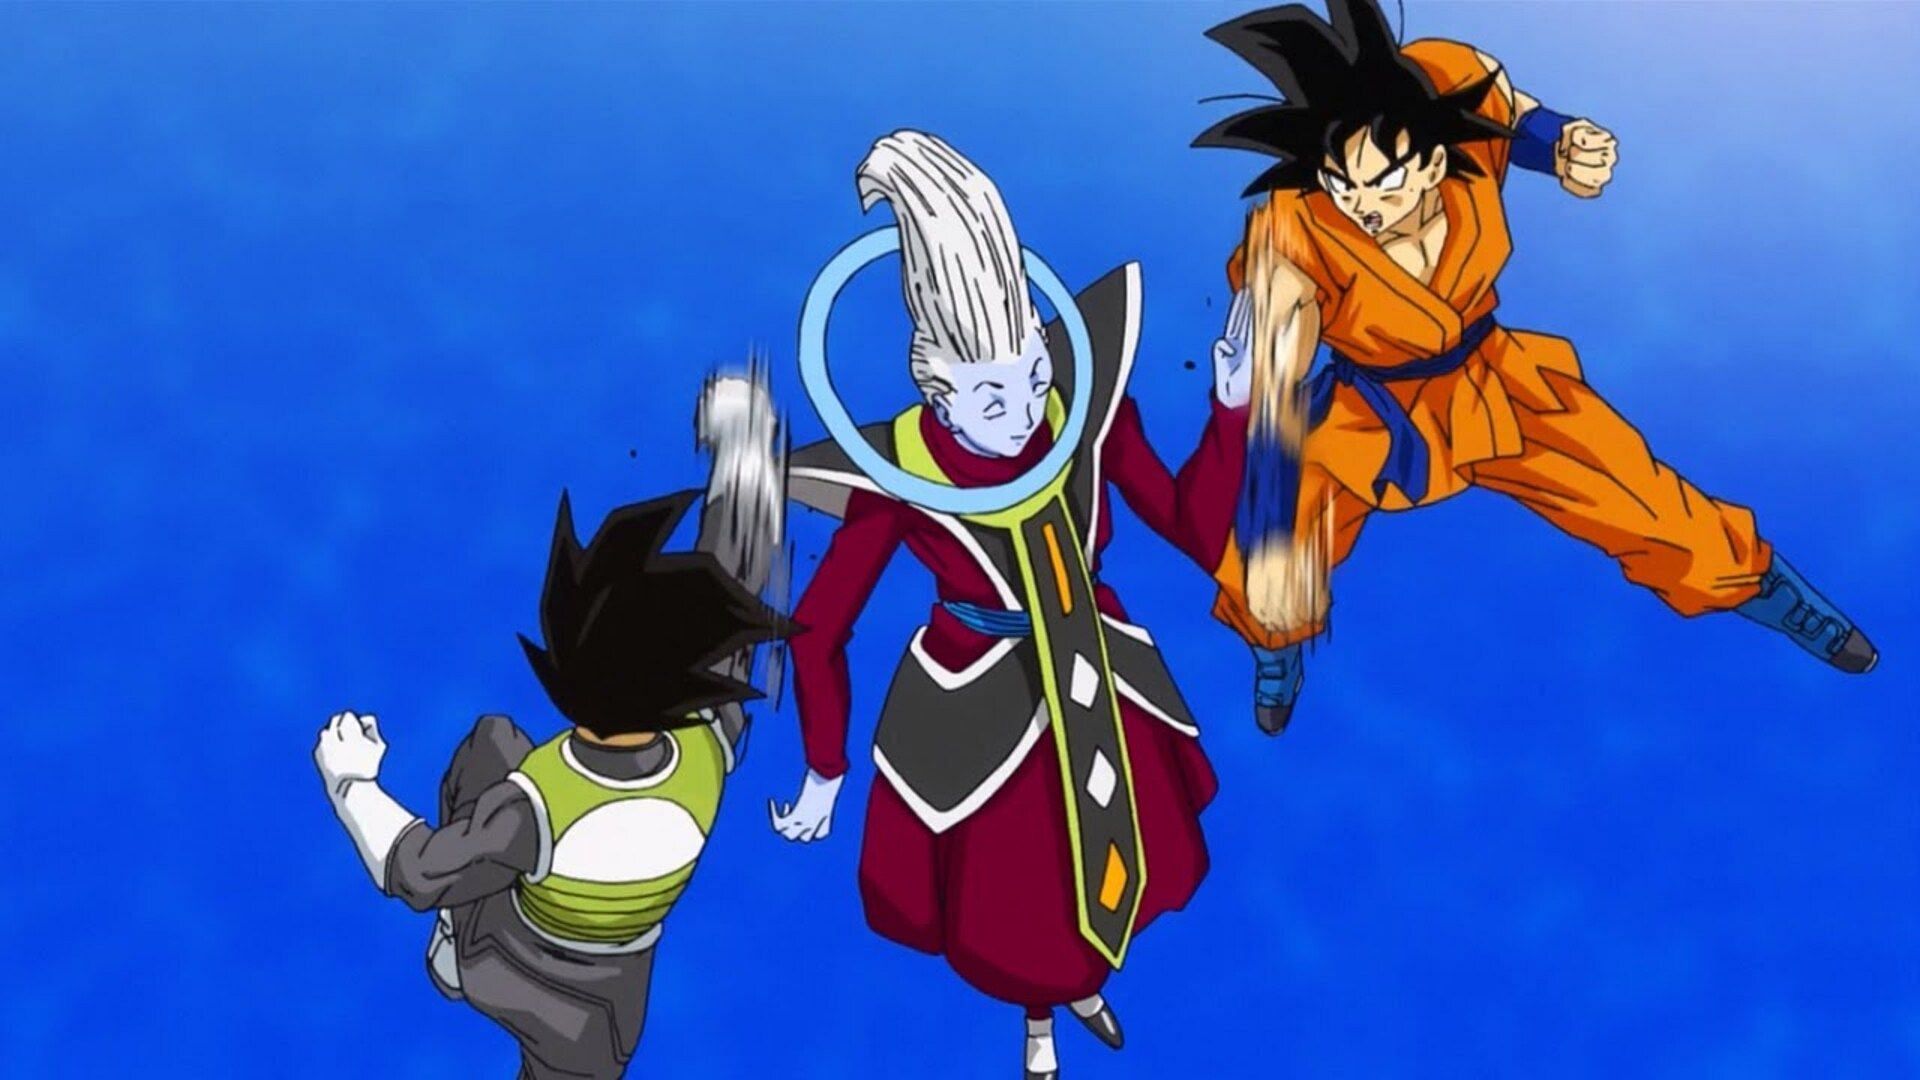 Dragon Ball Super Chapter 93 preview: Goku, Vegeta, and Broly unite in  intense training